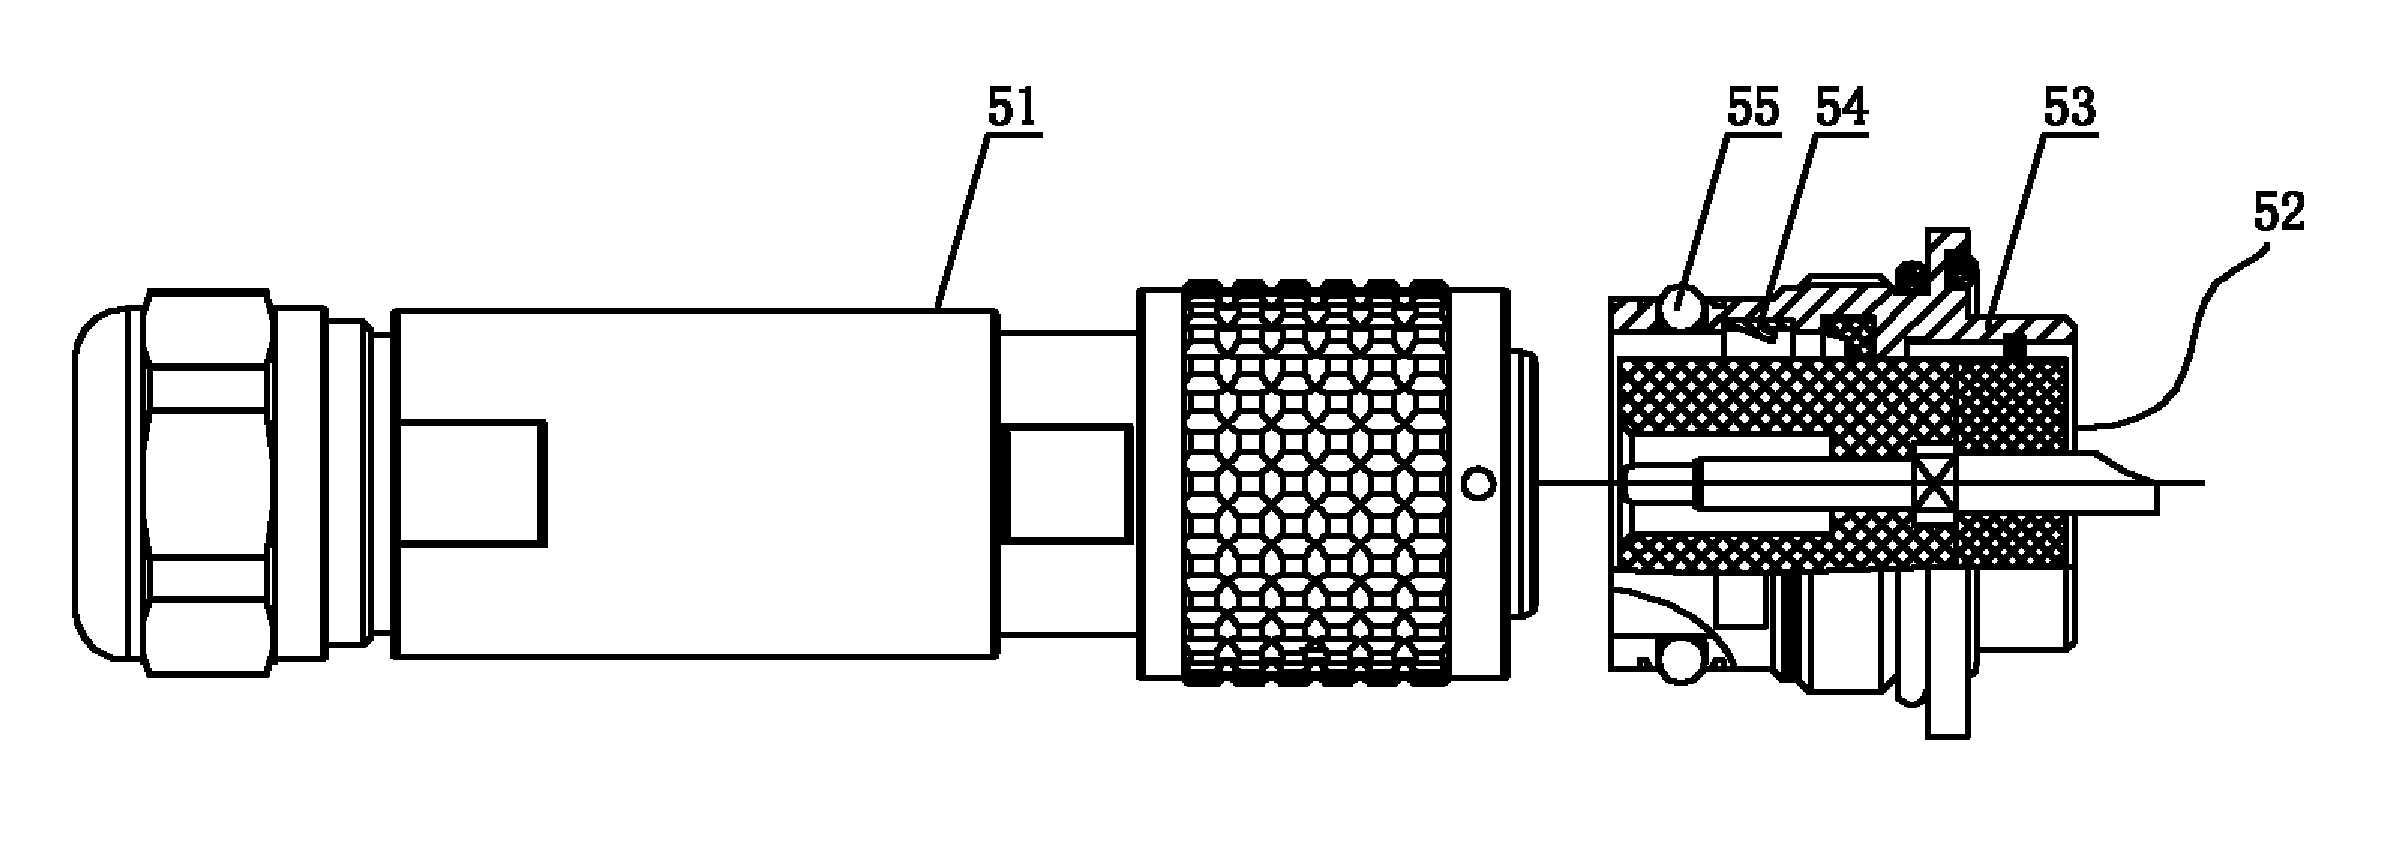 Electric connector assembly